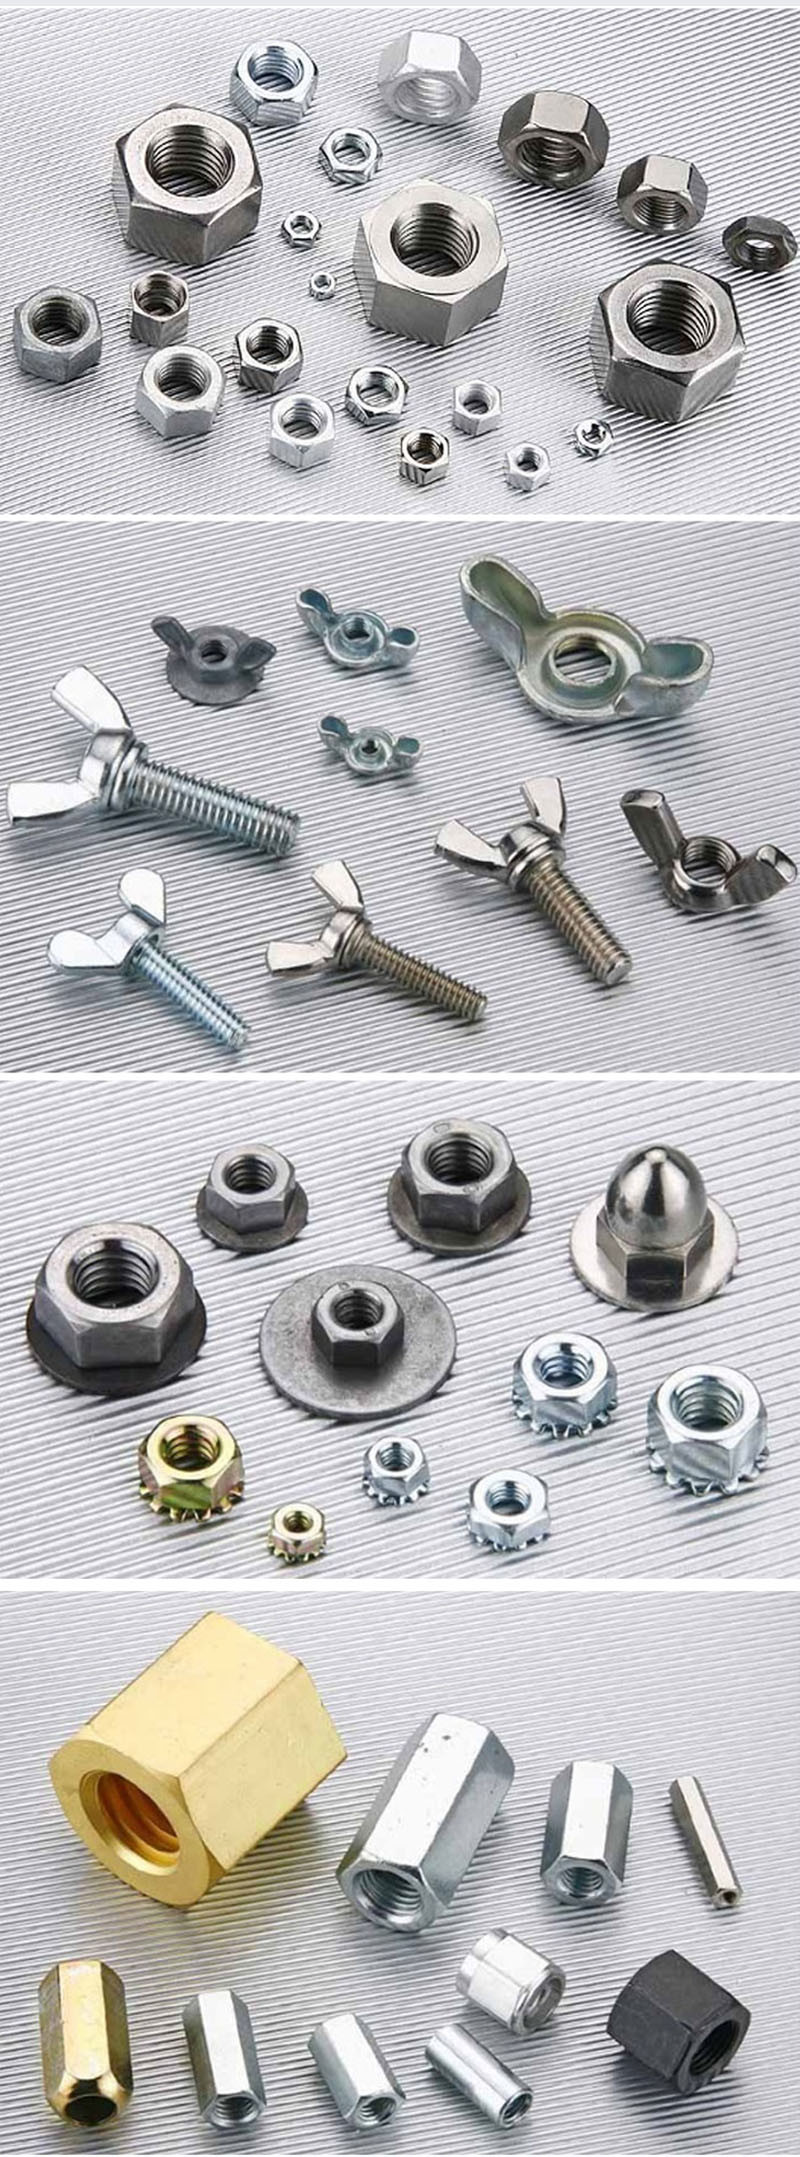 Flat Slotted Head Self Tapping Screw